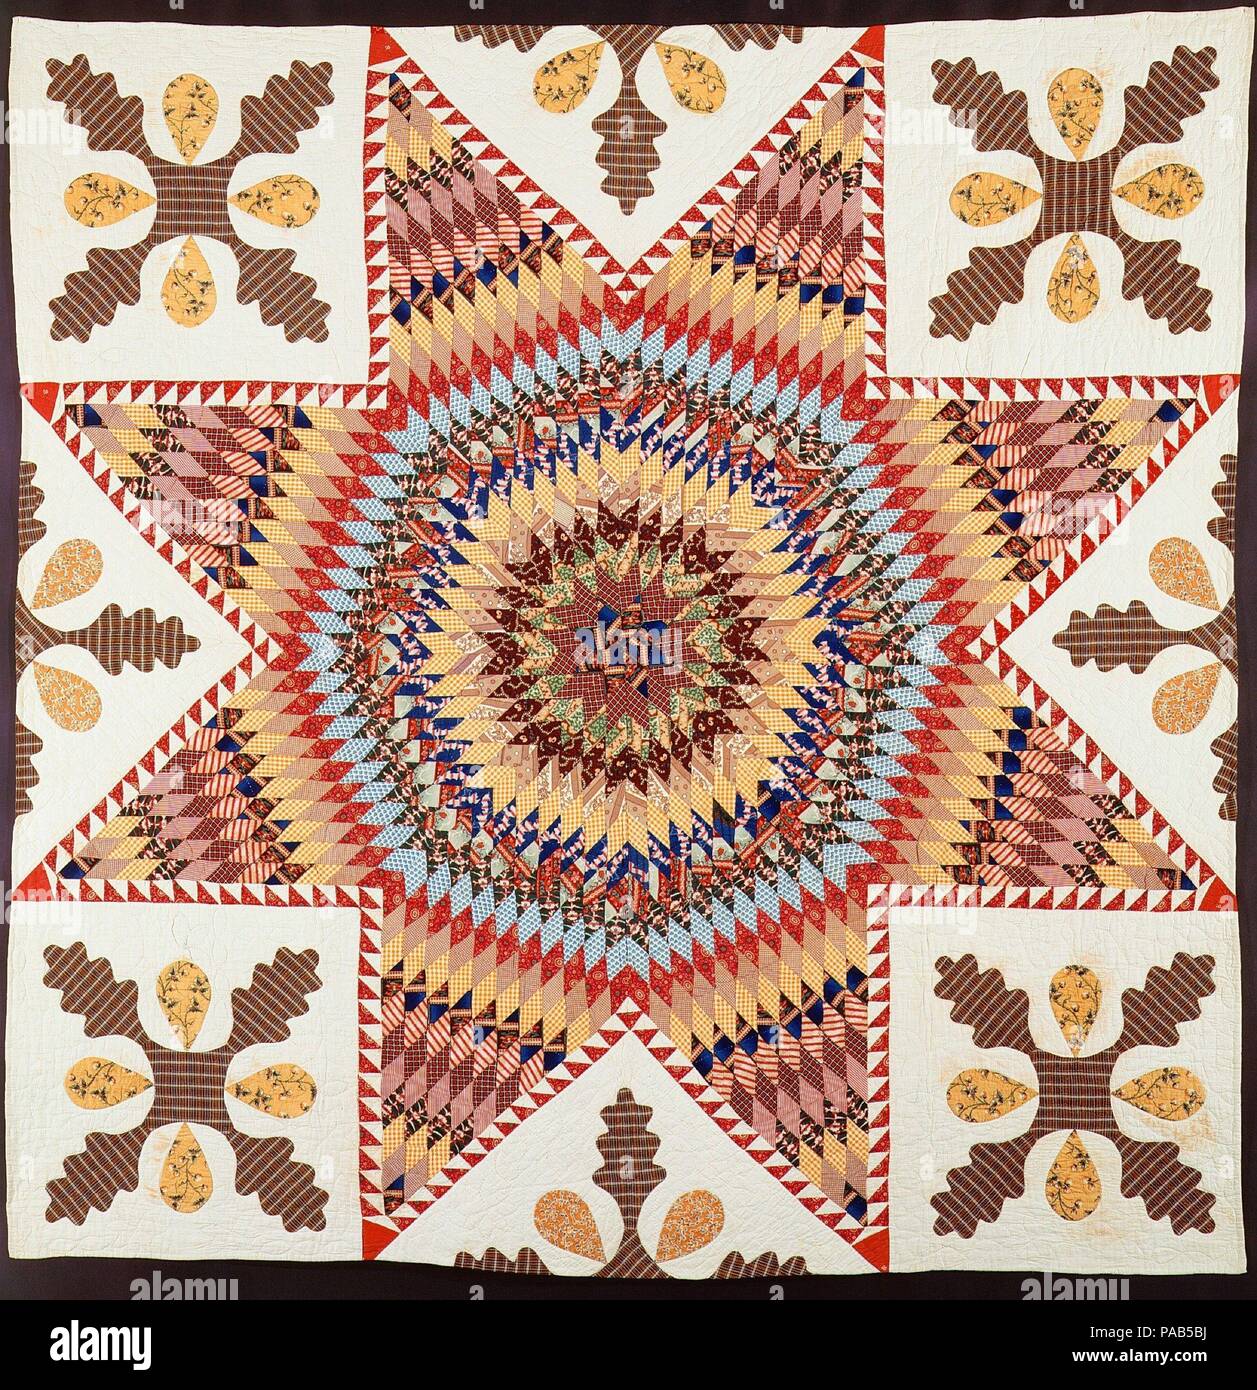 Quilt, Star of Bethlehem. Culture: American. Dimensions: 76 1/4 x 75 7/8 in. (193.7 x 192.7 cm). Maker: Members of the congregation of the First Baptist Church, Perth Amboy. Date: ca. 1845-48.  According to his granddaughter-in-law, Reverend George Faitute Hendricksen (1817-1894) received this quilt as a gift from his congregation during a church Harvest Festival. A minister for over fifty years, Hendricksen served as pastor of the First Baptist Church of Perth Amboy from 1845 to 1848. It was not uncommon for congregations to create quilts for ministers when they departed for another church; p Stock Photo